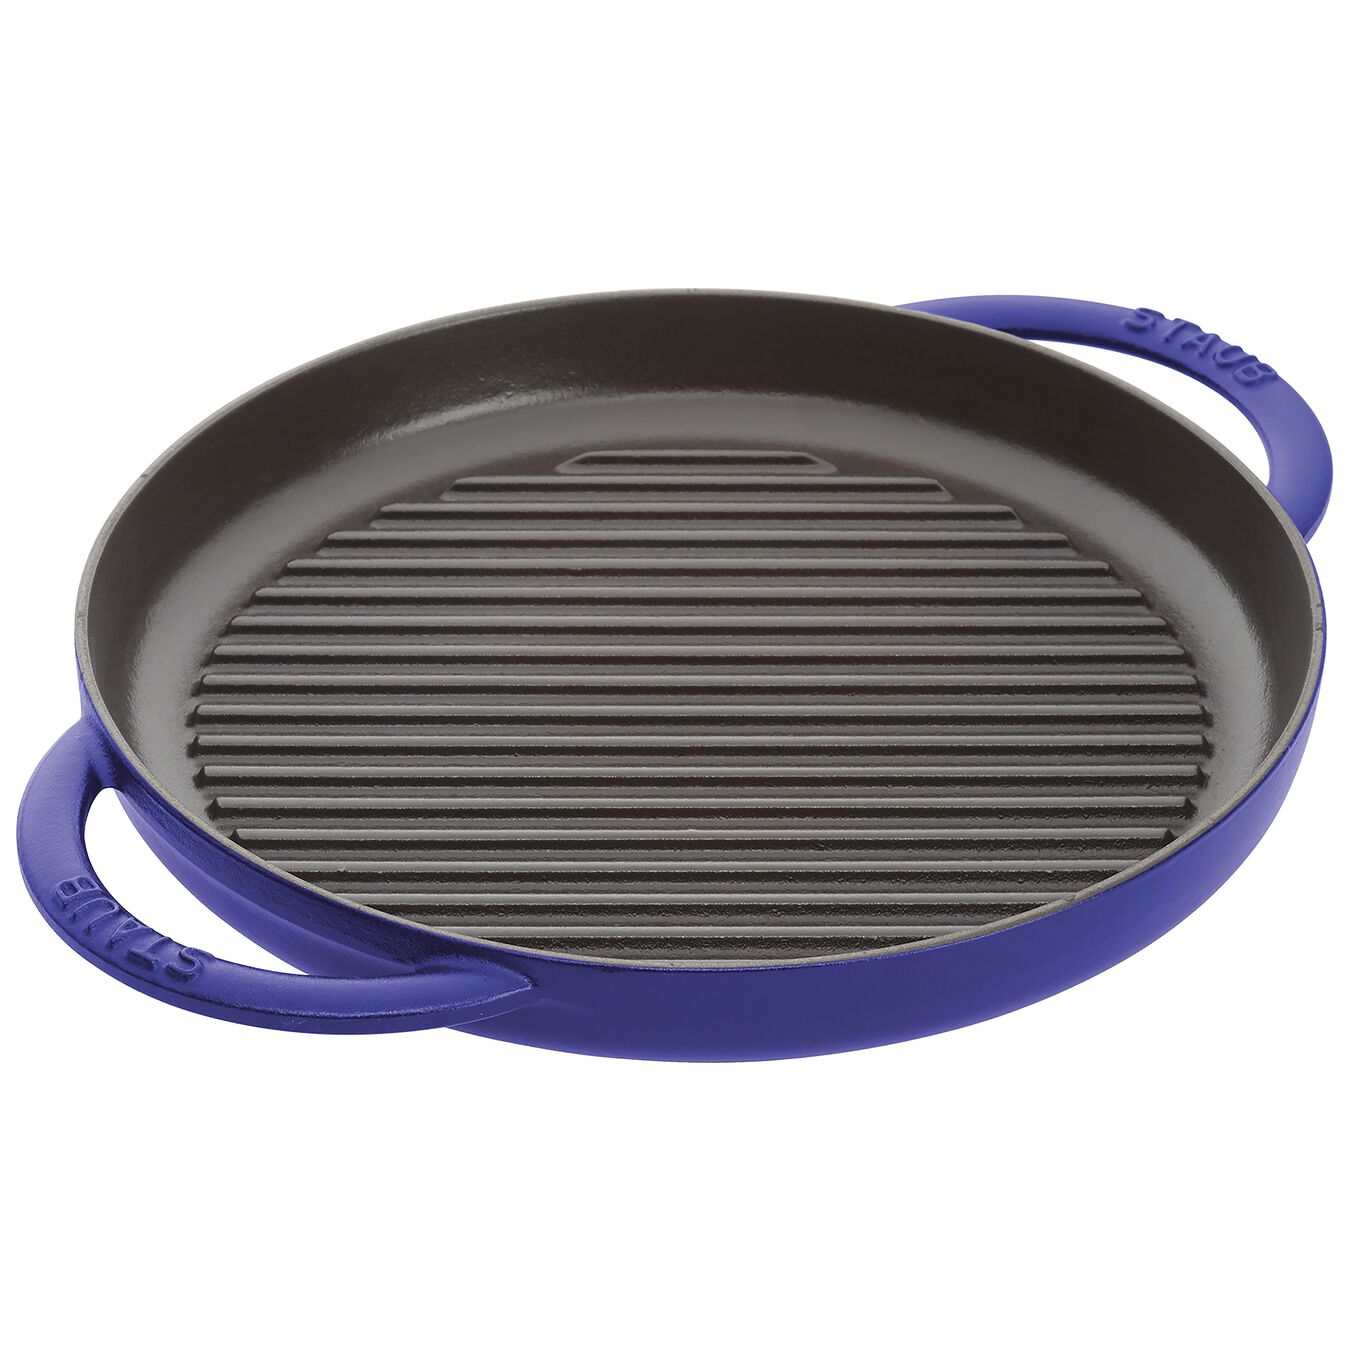 10-inch, Round Double Handle Pure Grill, dark blue,,large 1